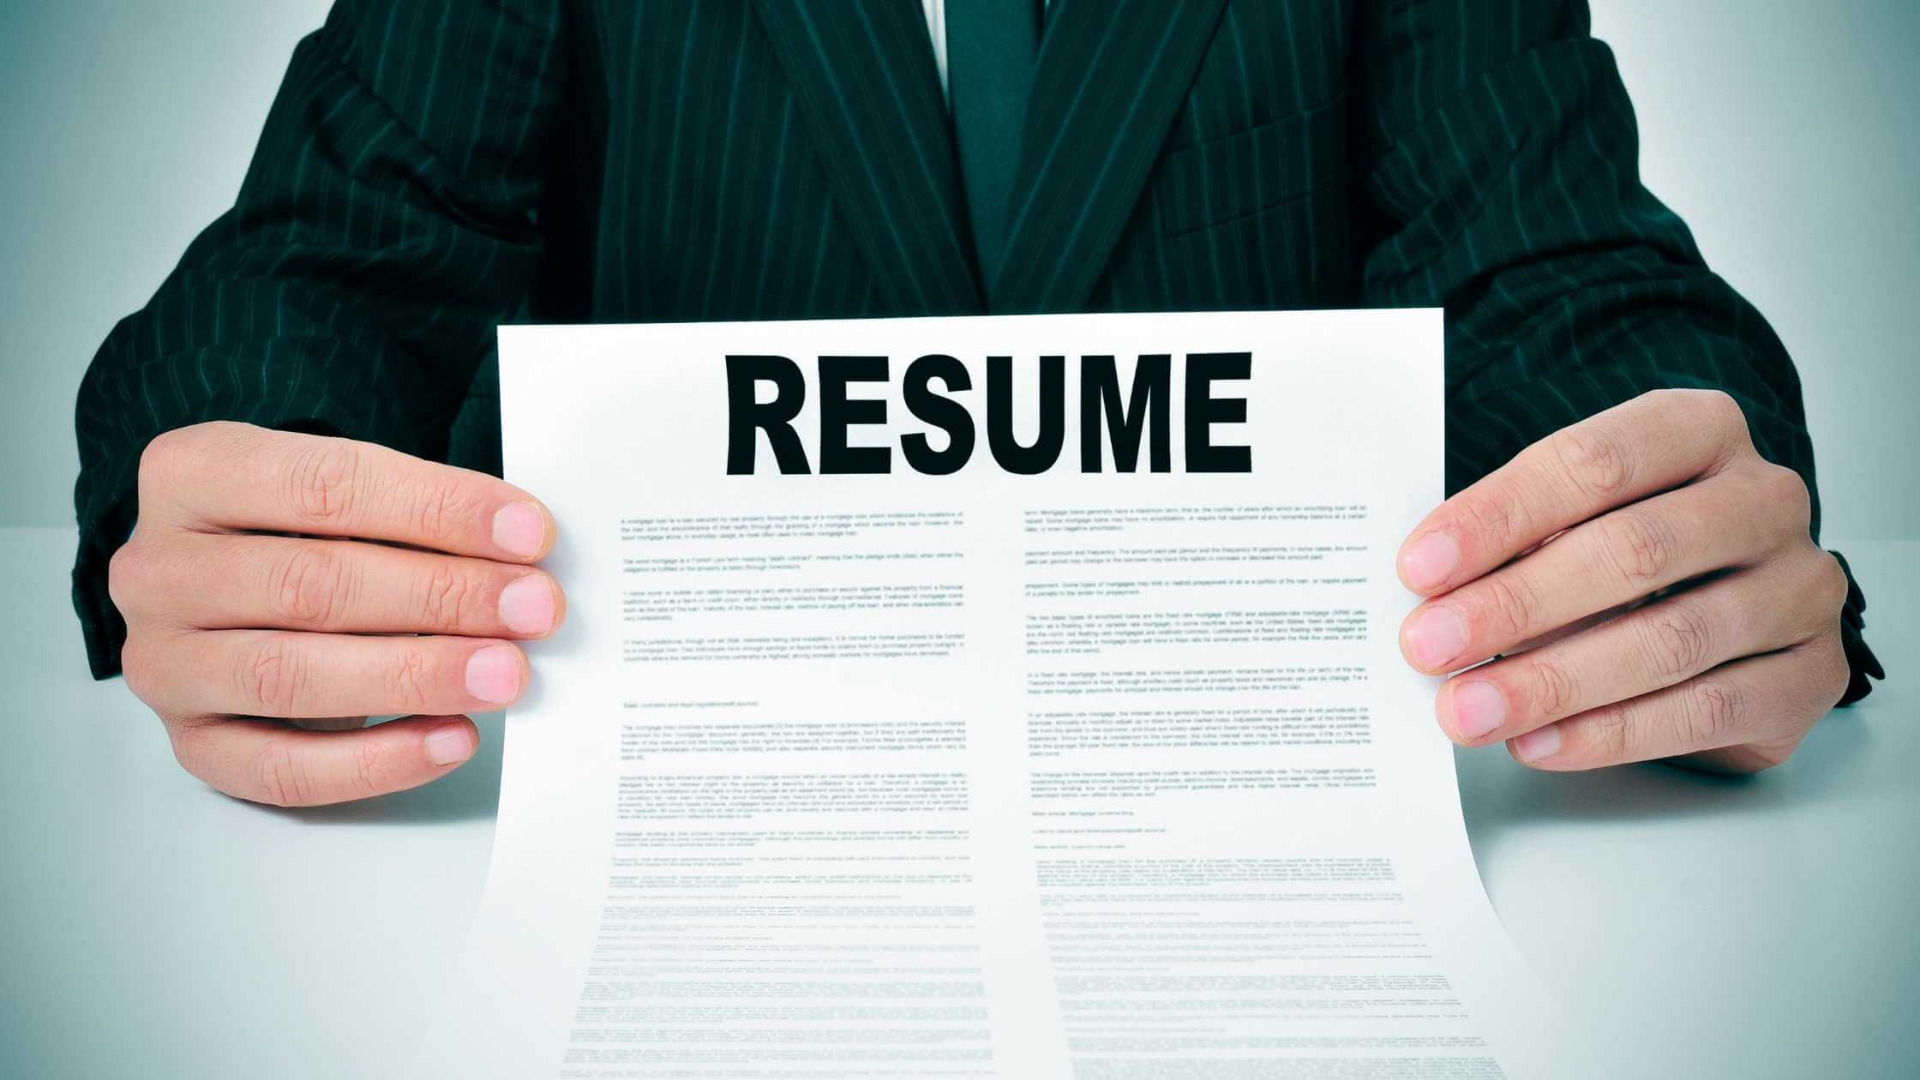 holding a job applicant's resume in your hands